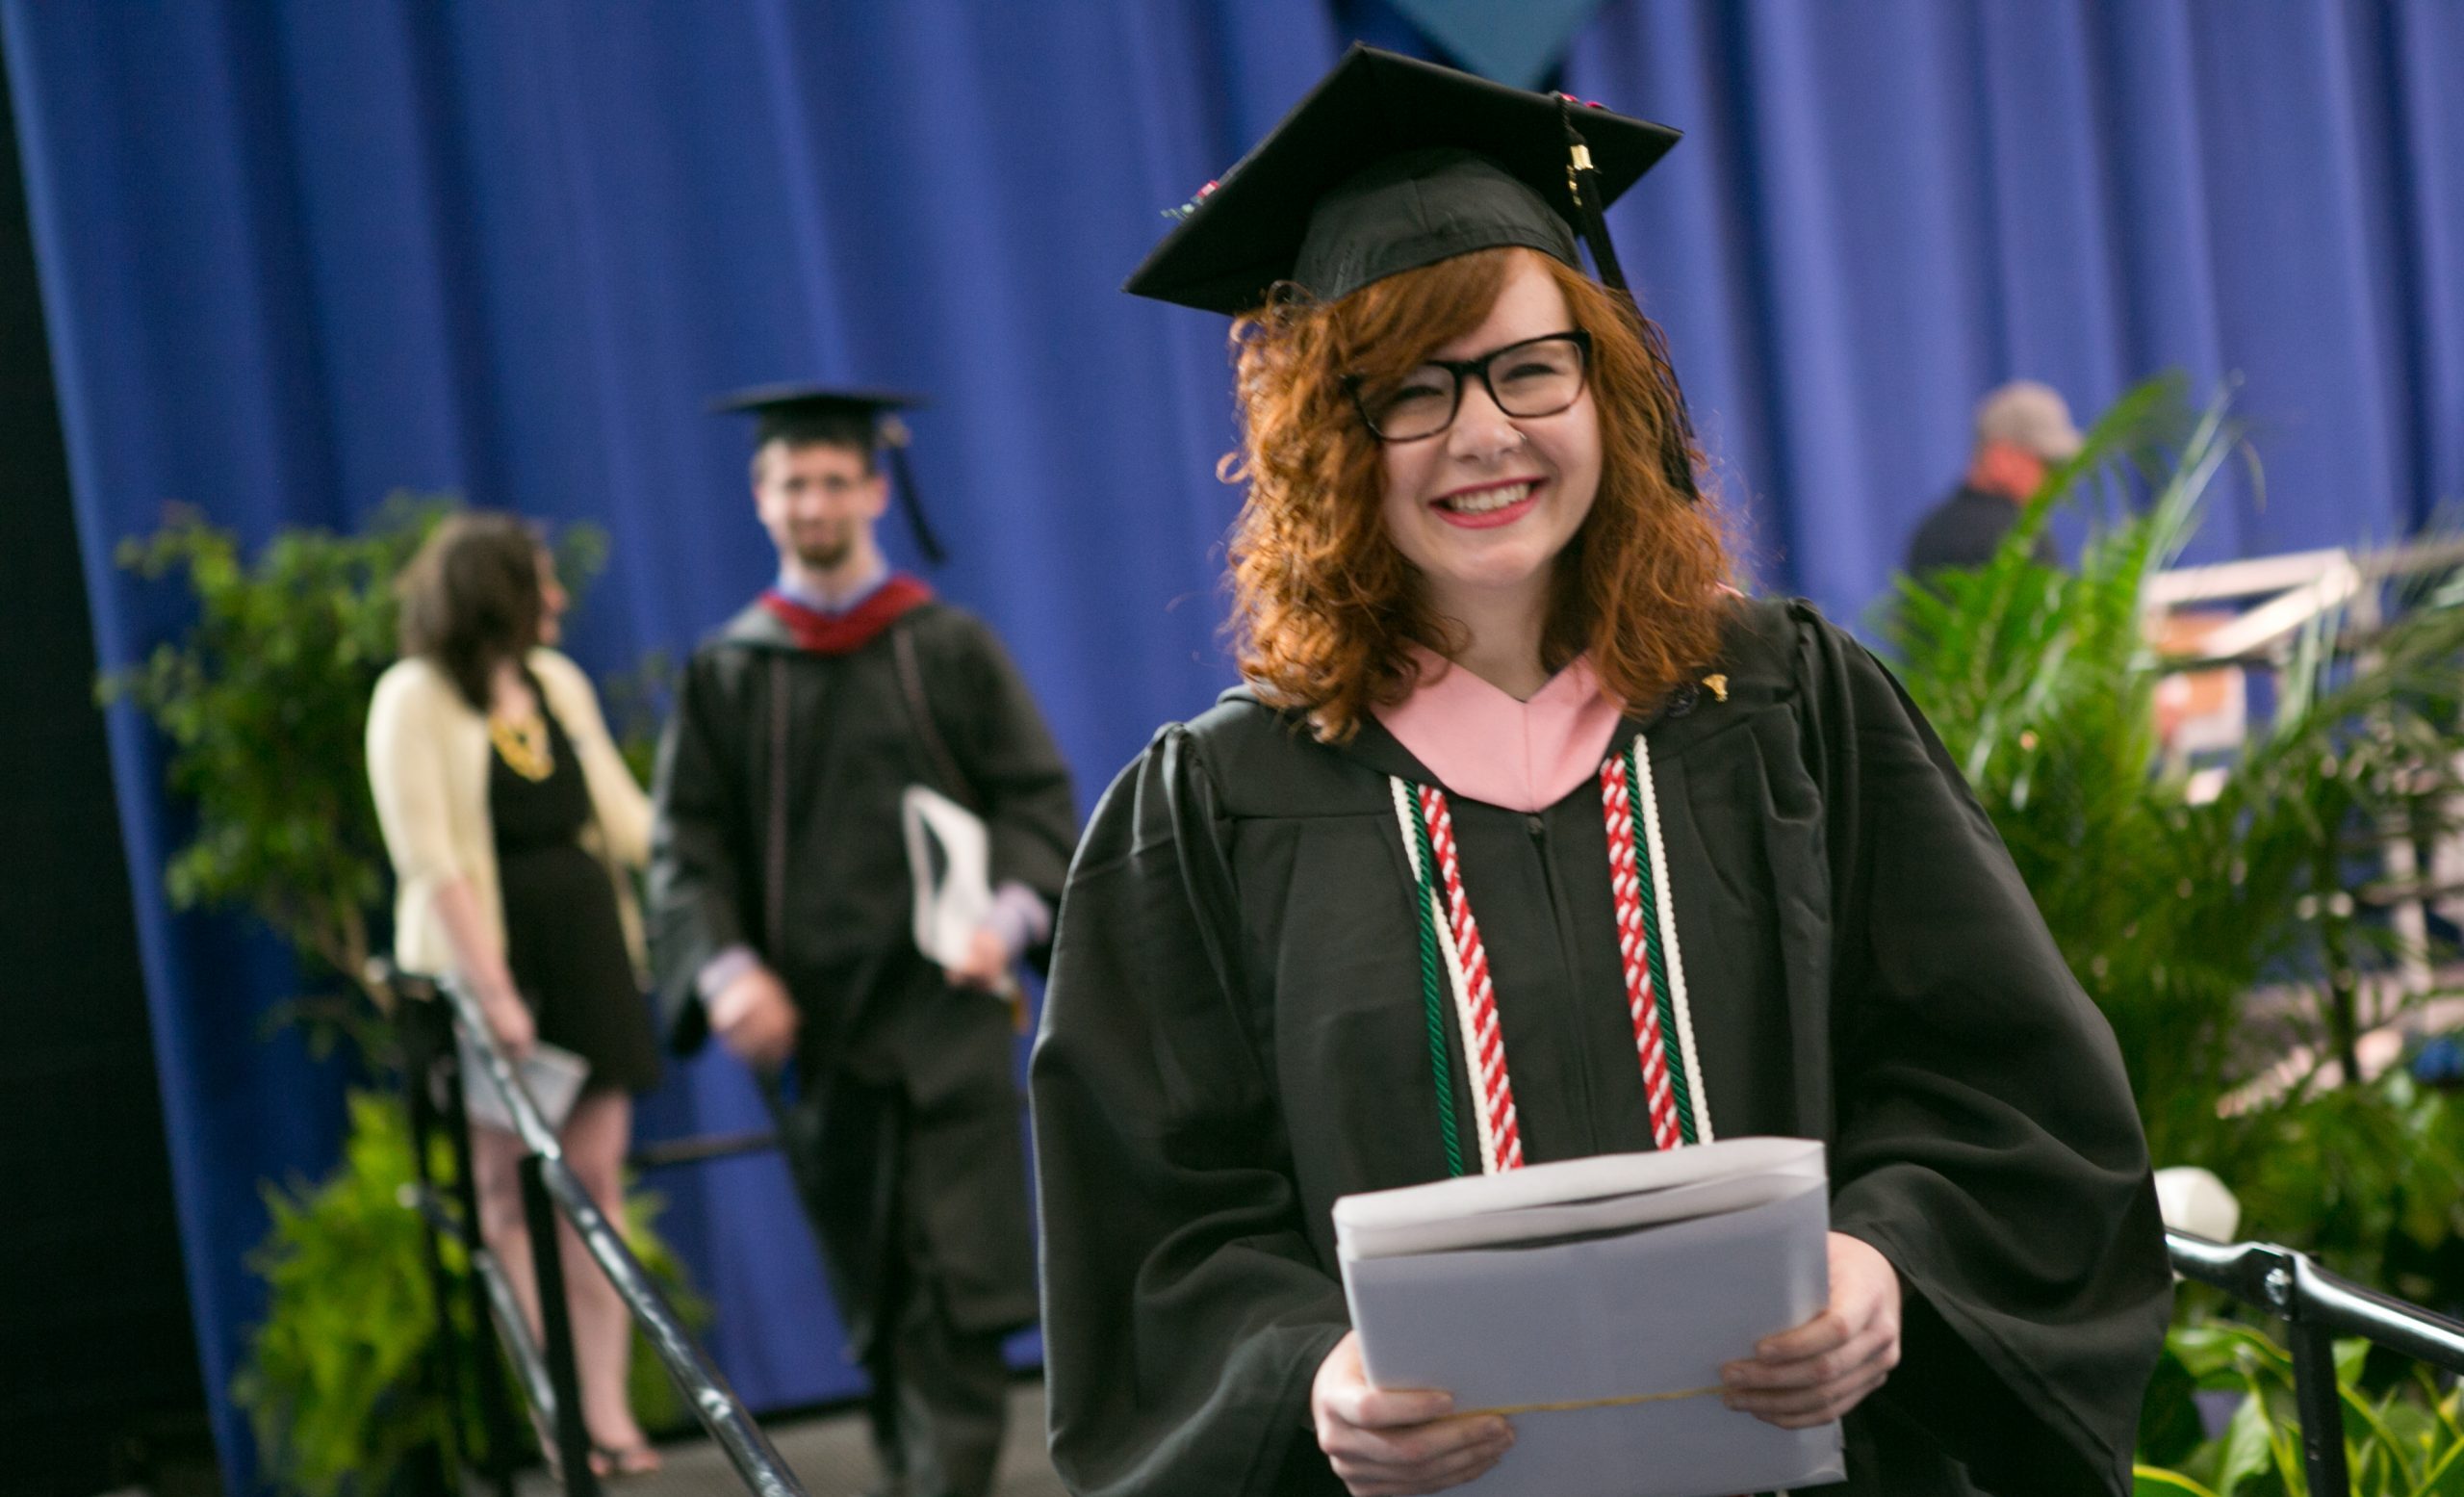 Hannah Pell at Commencement ceremony